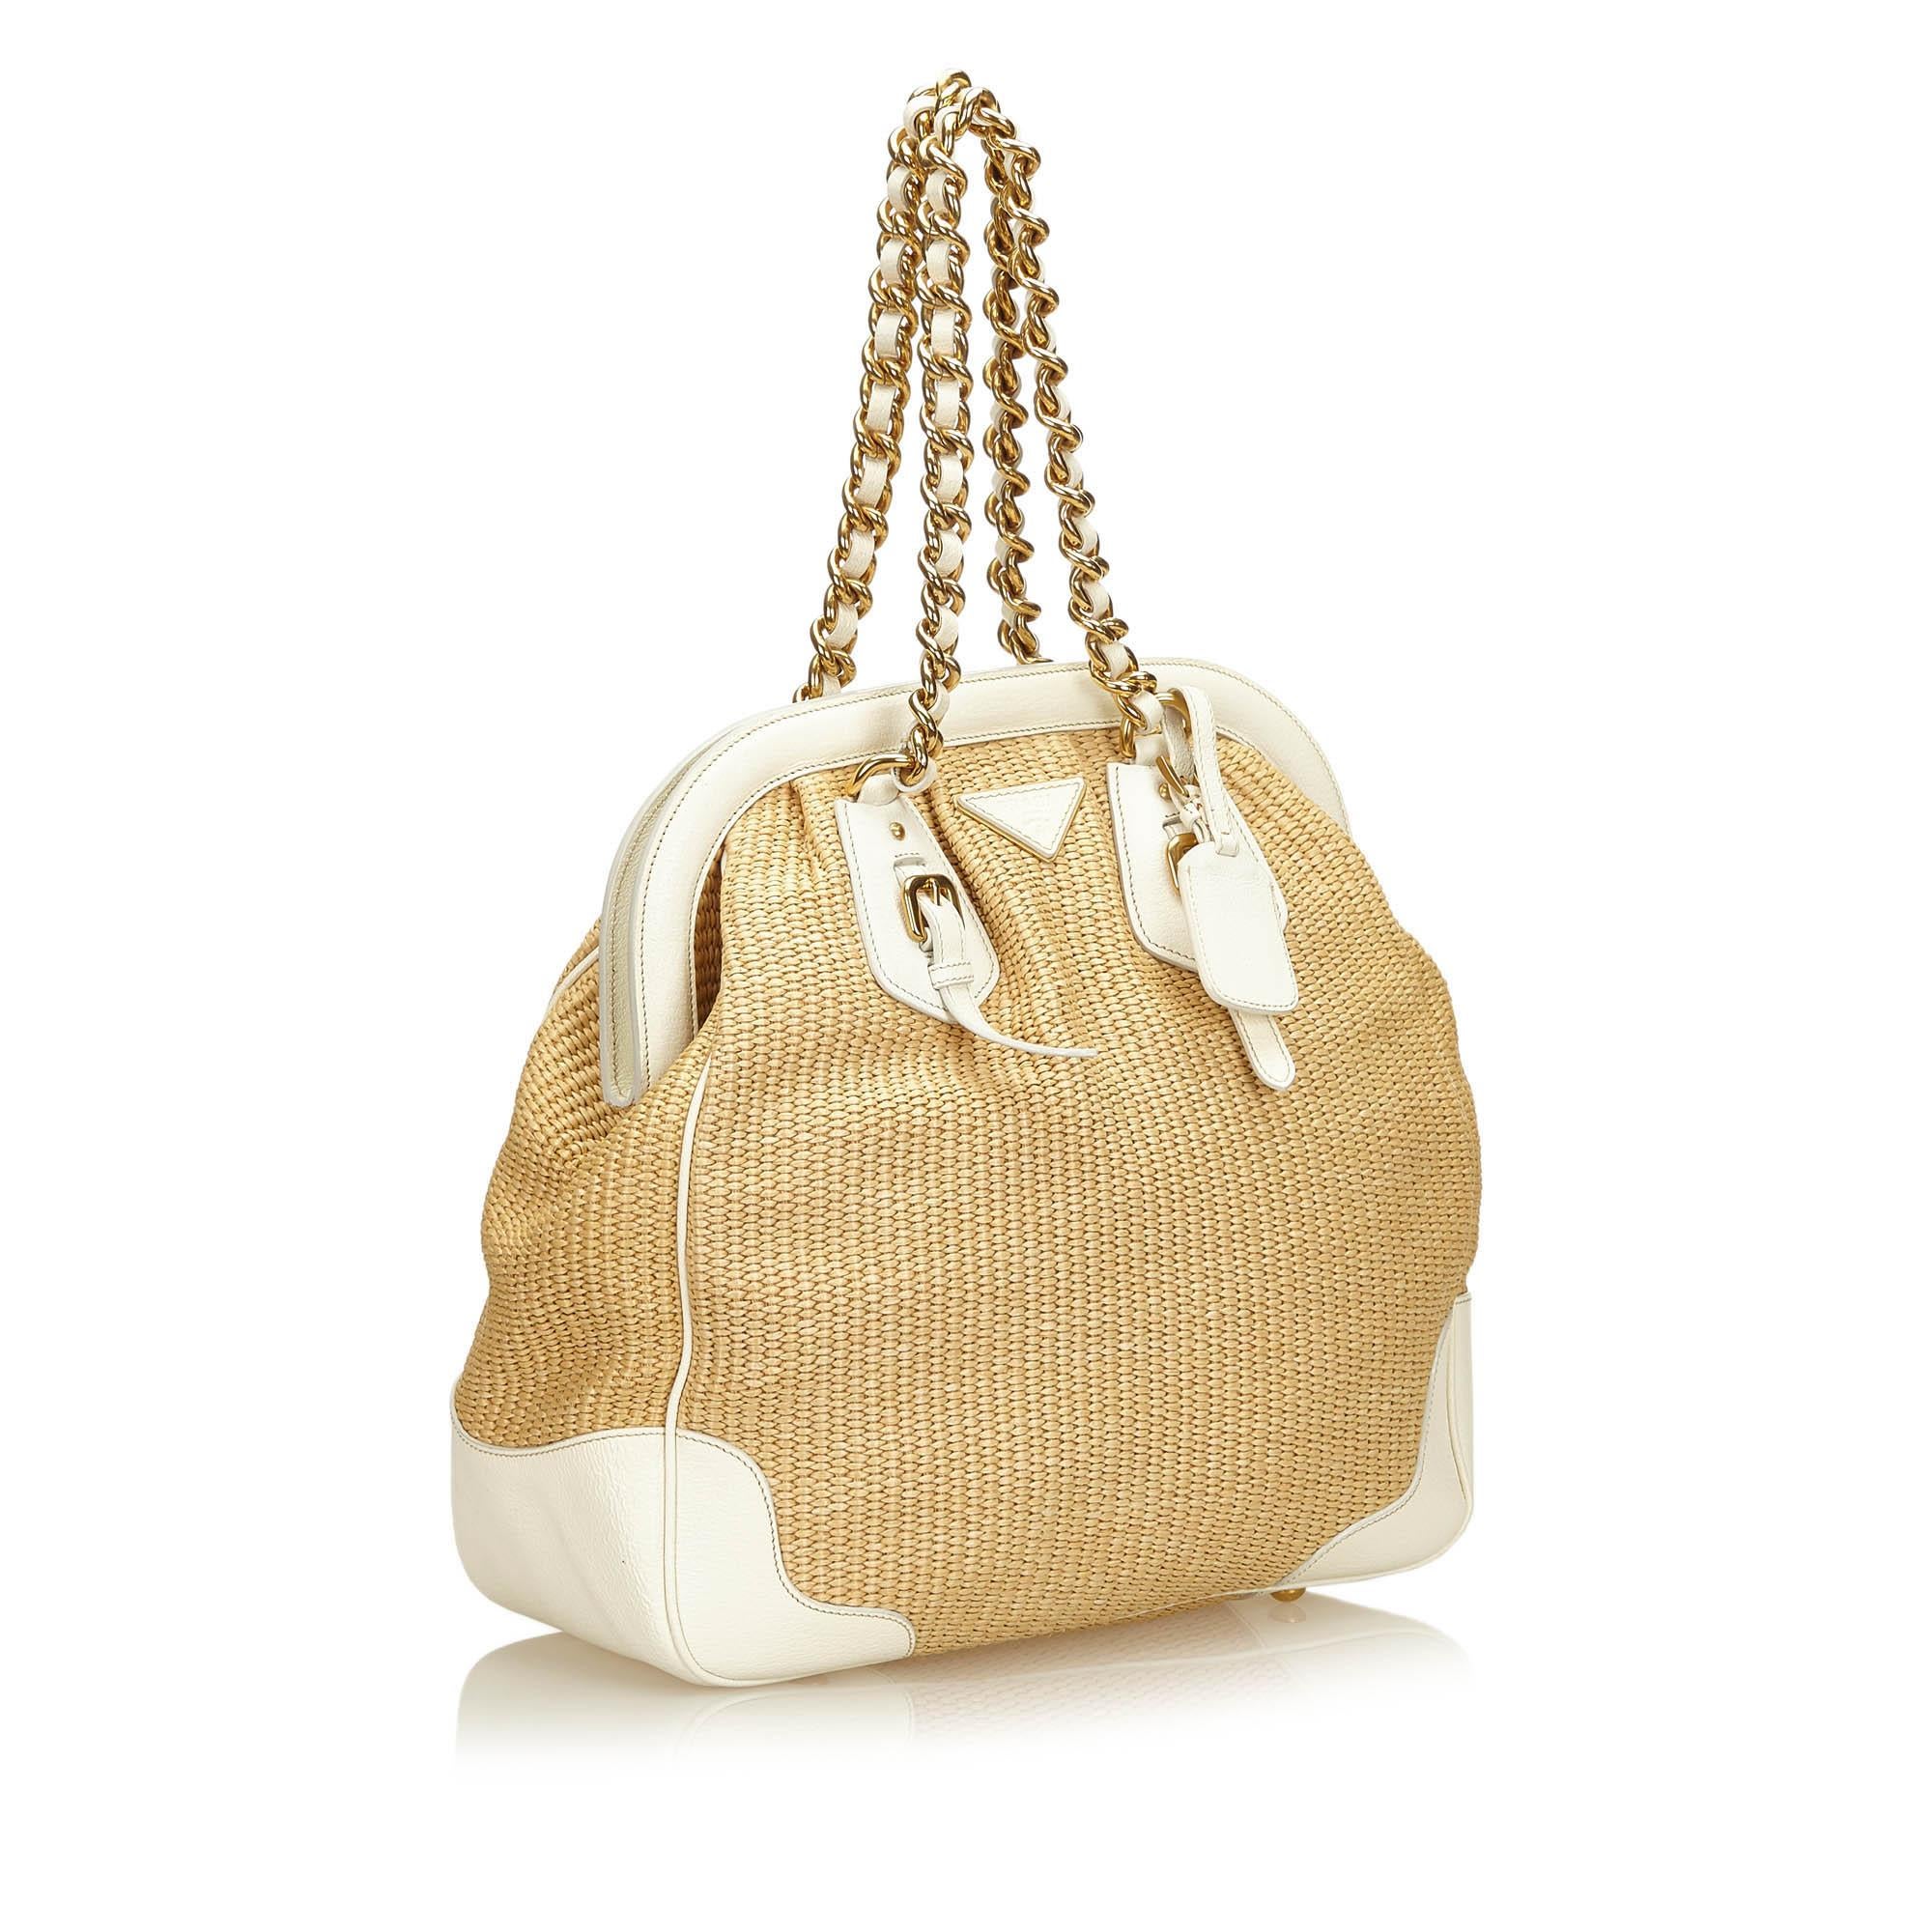 This shoulder bag features a straw body with leather trim, gold-tone chain handle, magnetic top closure, interior zip pocket, and an interior slip pocket. It carries as A condition rating.

Inclusions: 
Dust Bag
Authenticity